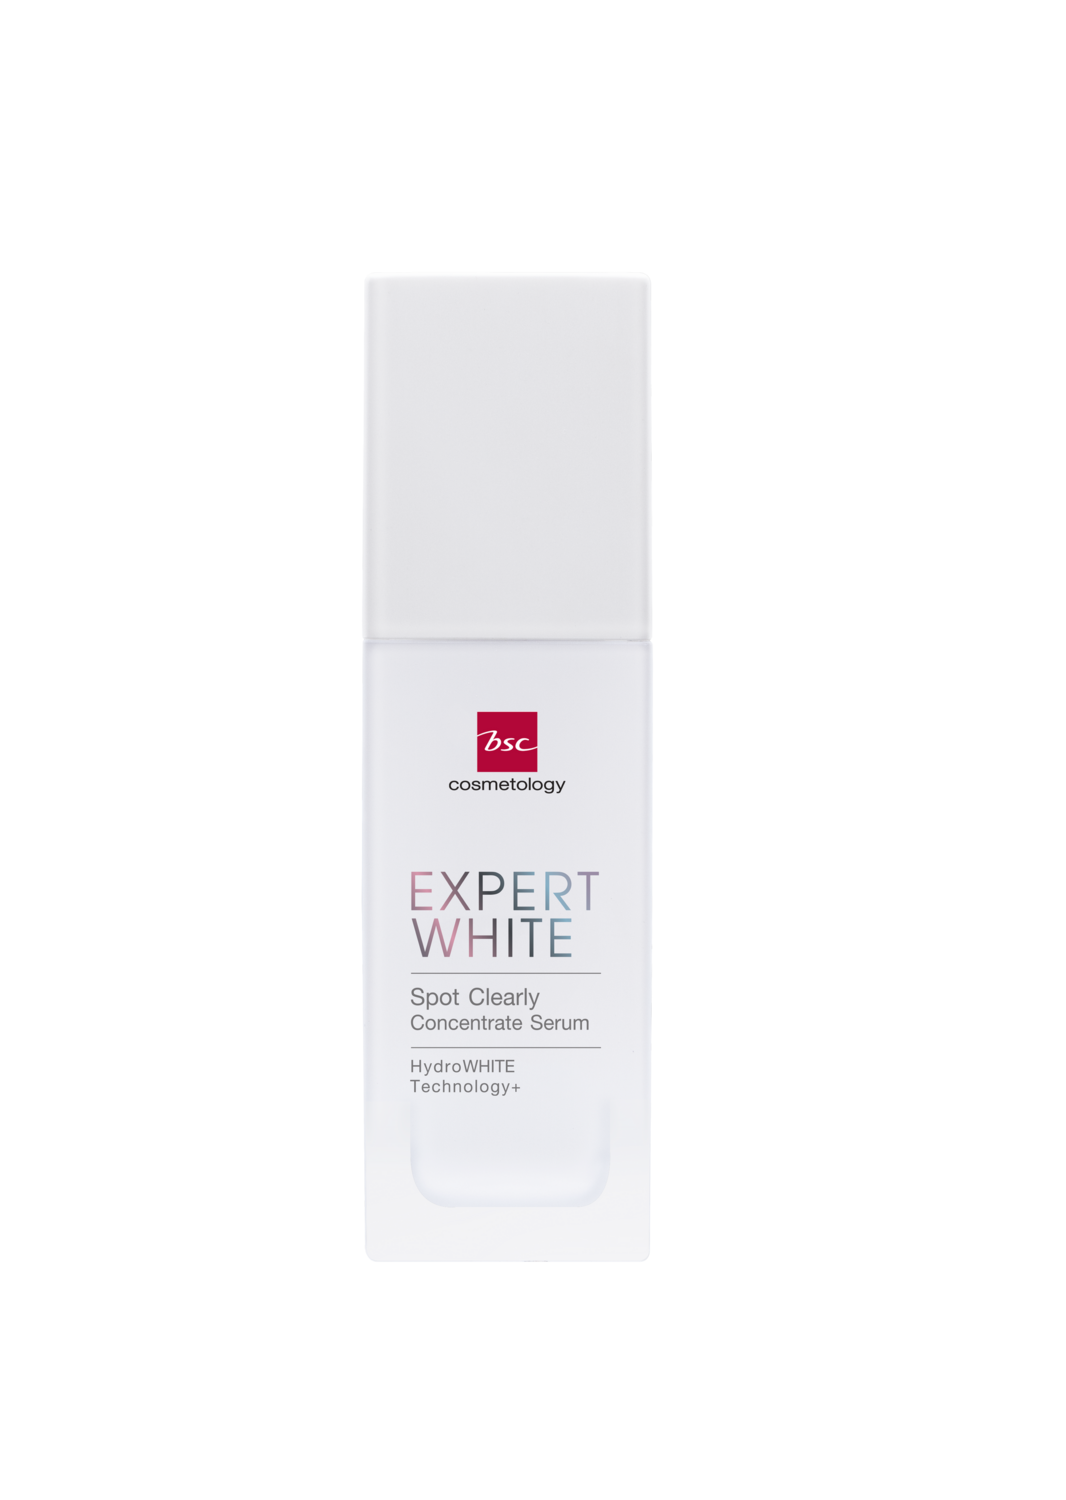 BSC EXPERT WHITE SPOT CLEARLY CONCENTRATE SERUM